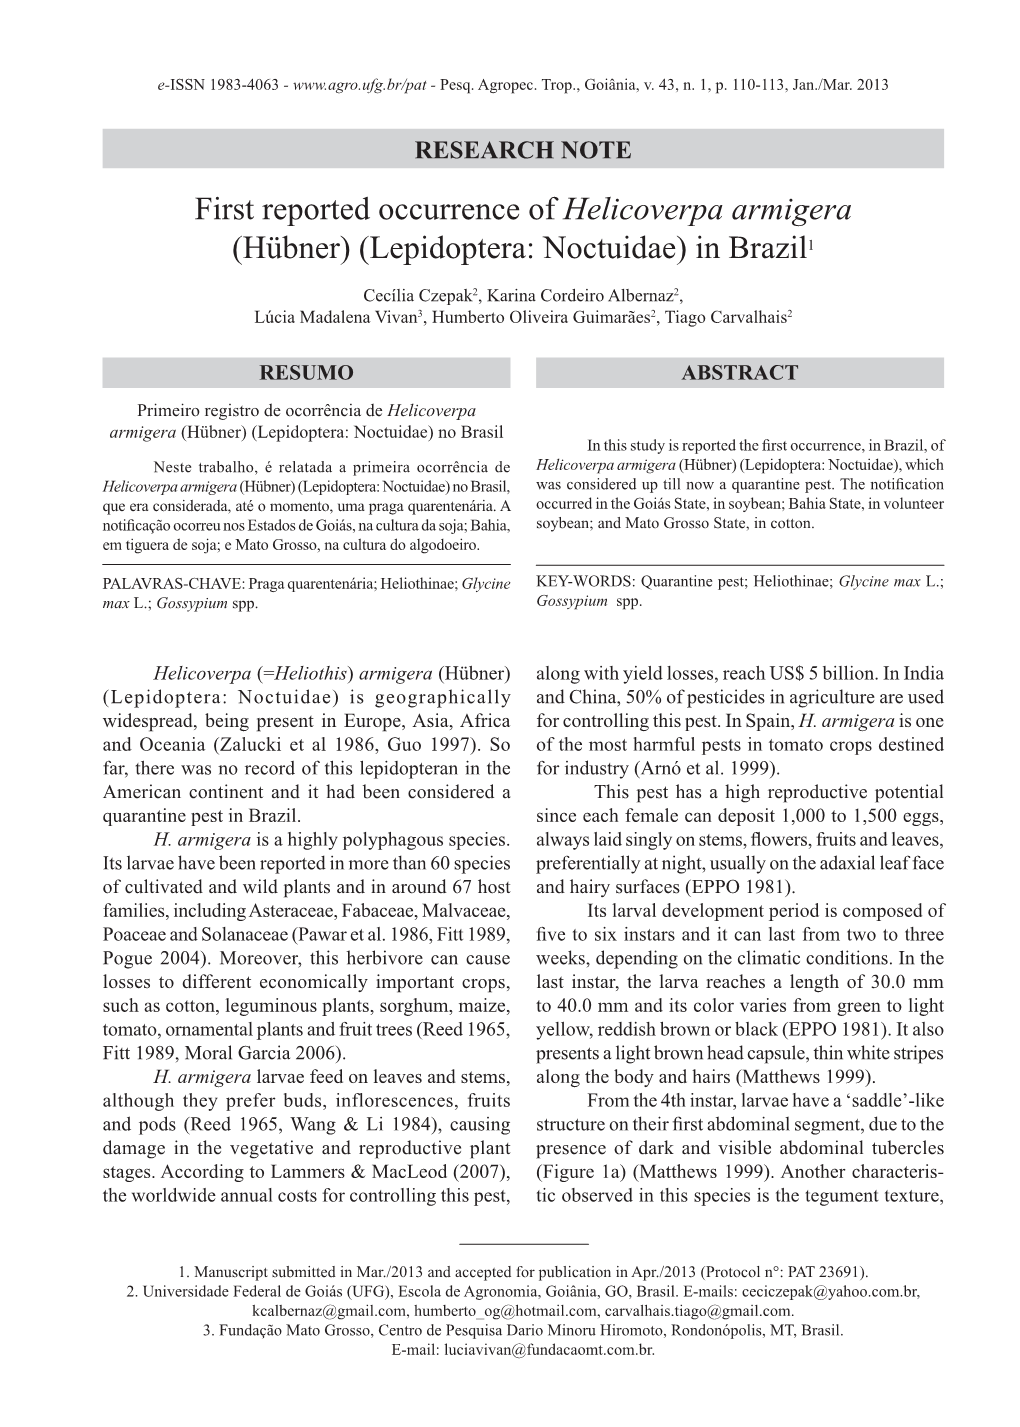 First Reported Occurrence of Helicoverpa Armigera (Hübner) (Lepidoptera: Noctuidae) in Brazil1